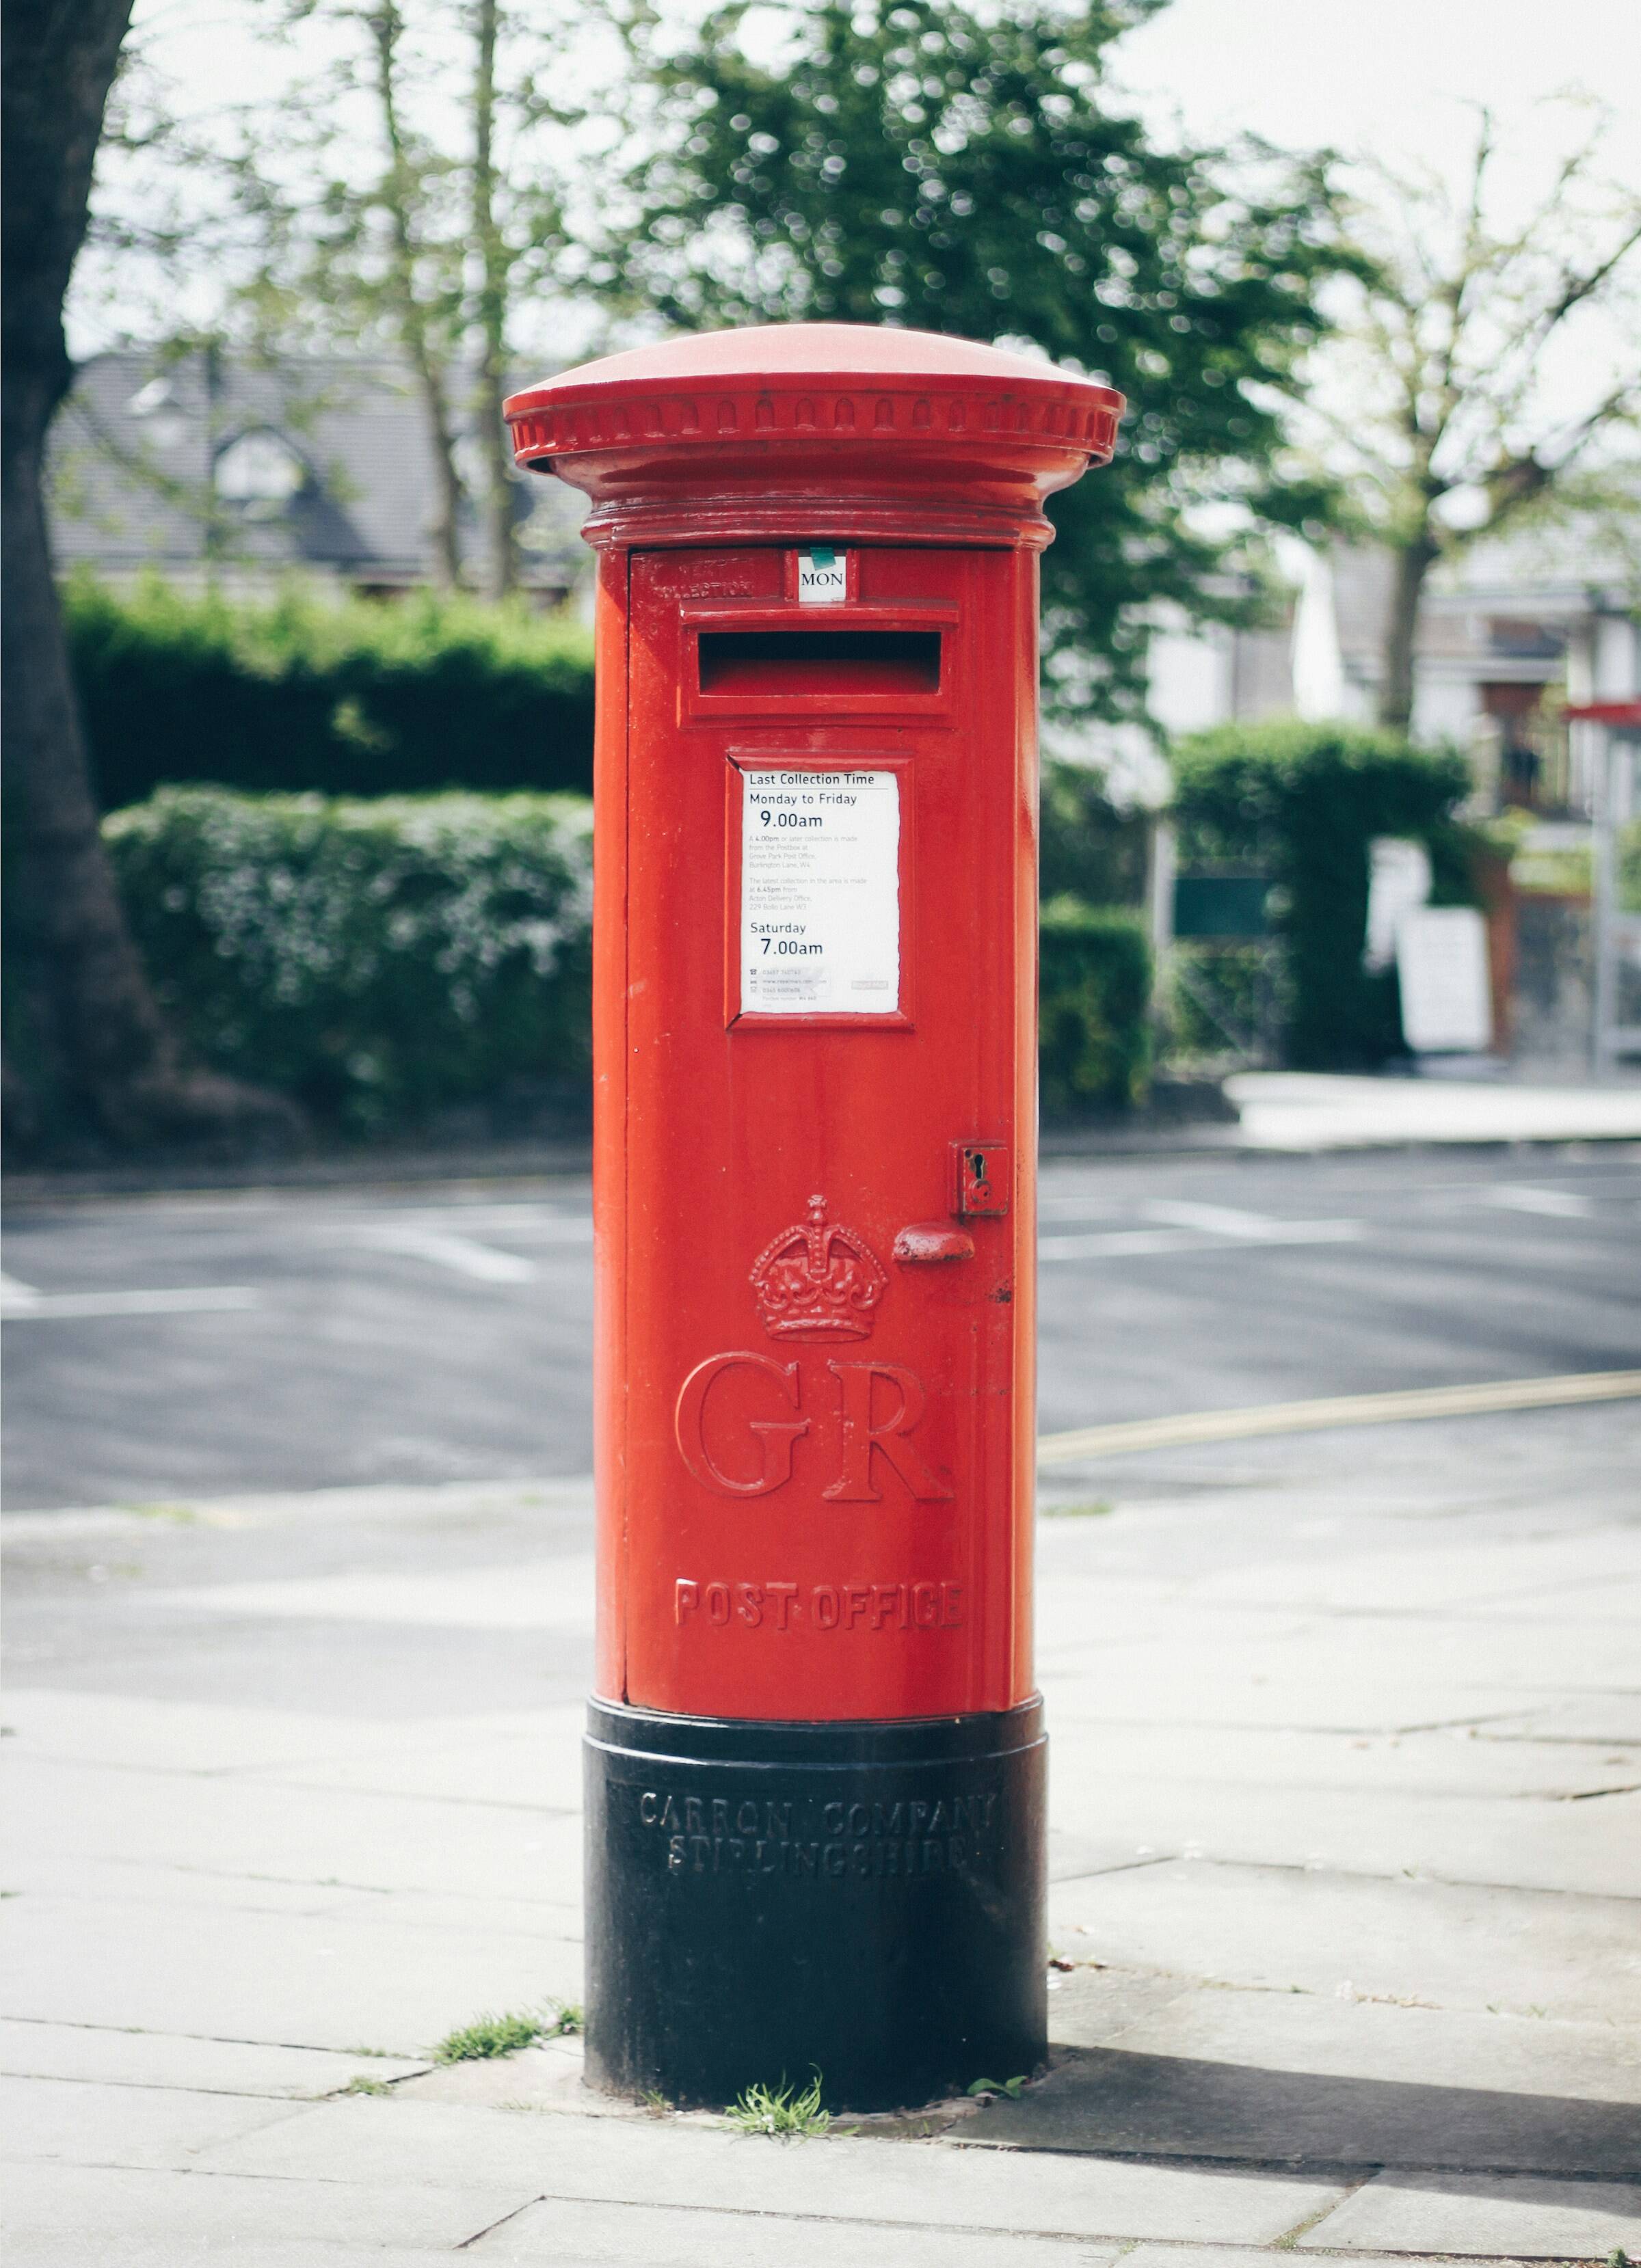 Has Post Office wrongly claimed tax relief for compensation?